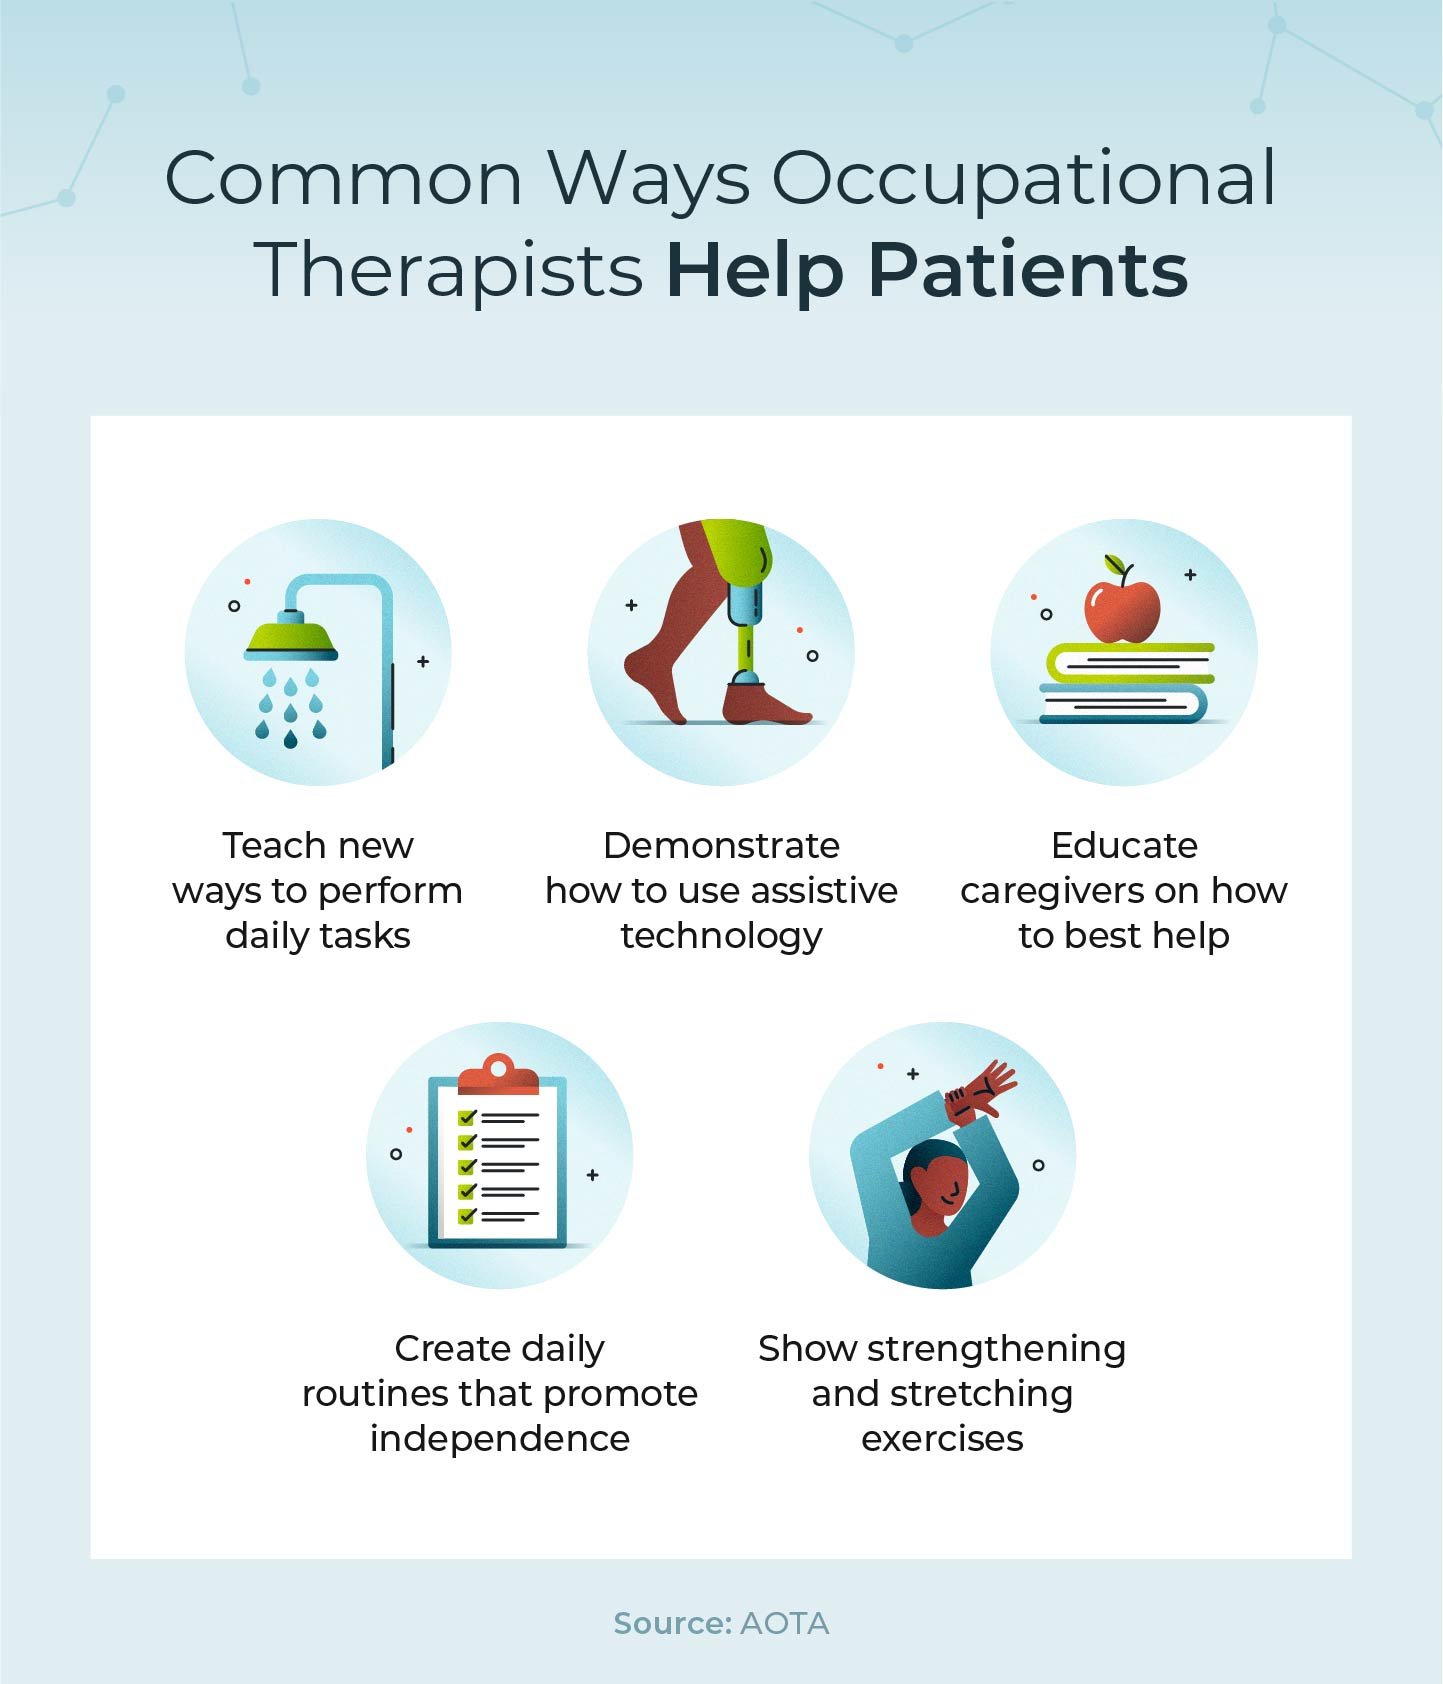 How occupational therapists help patients.